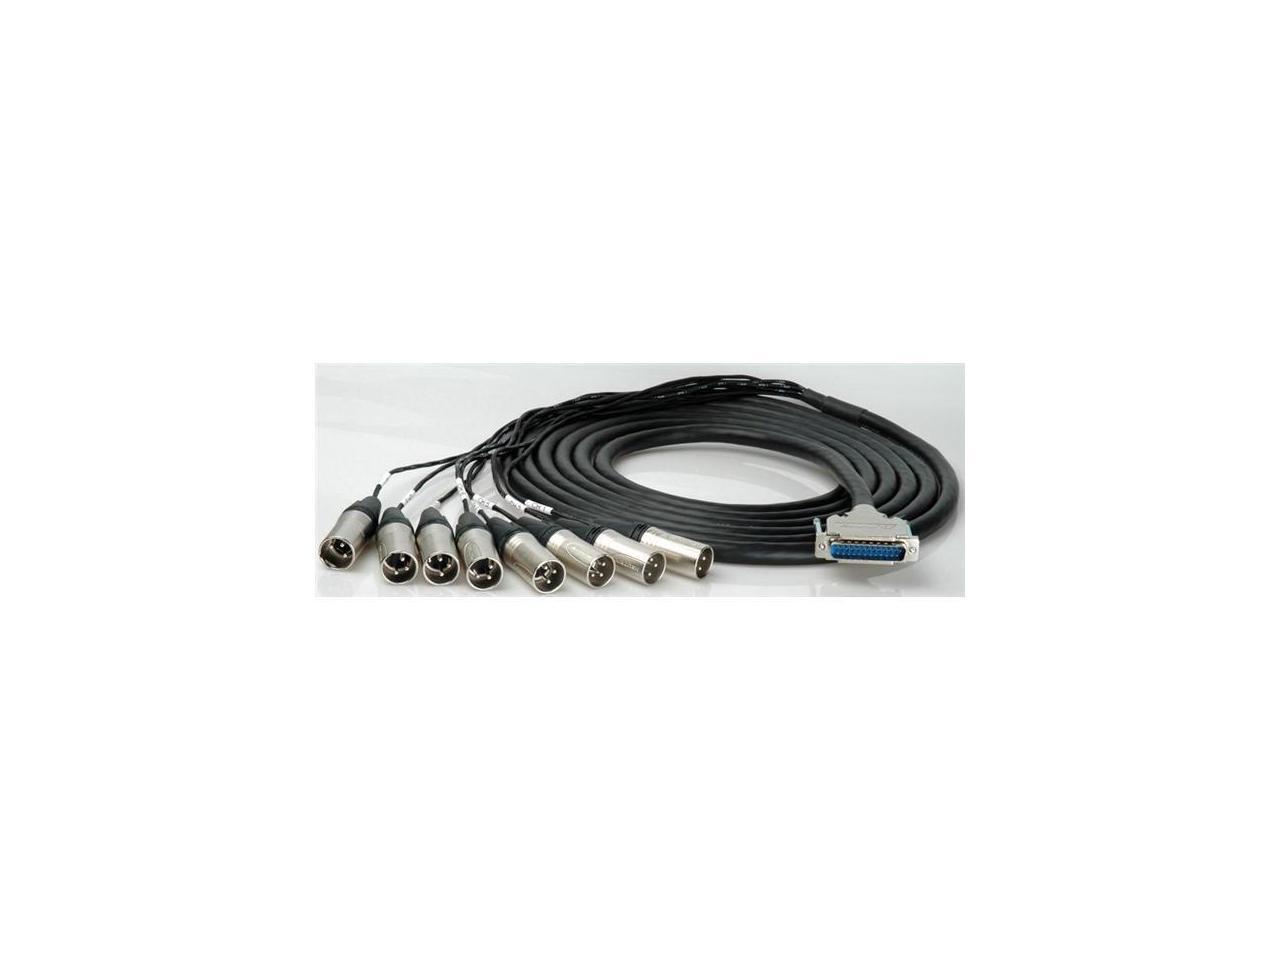 Sescom Built Gepco Digital 25Pin DSub Male to 8 XLR Male Audio Cable with 18 inch Fanouts - Tascam-Digi - 25 Foot